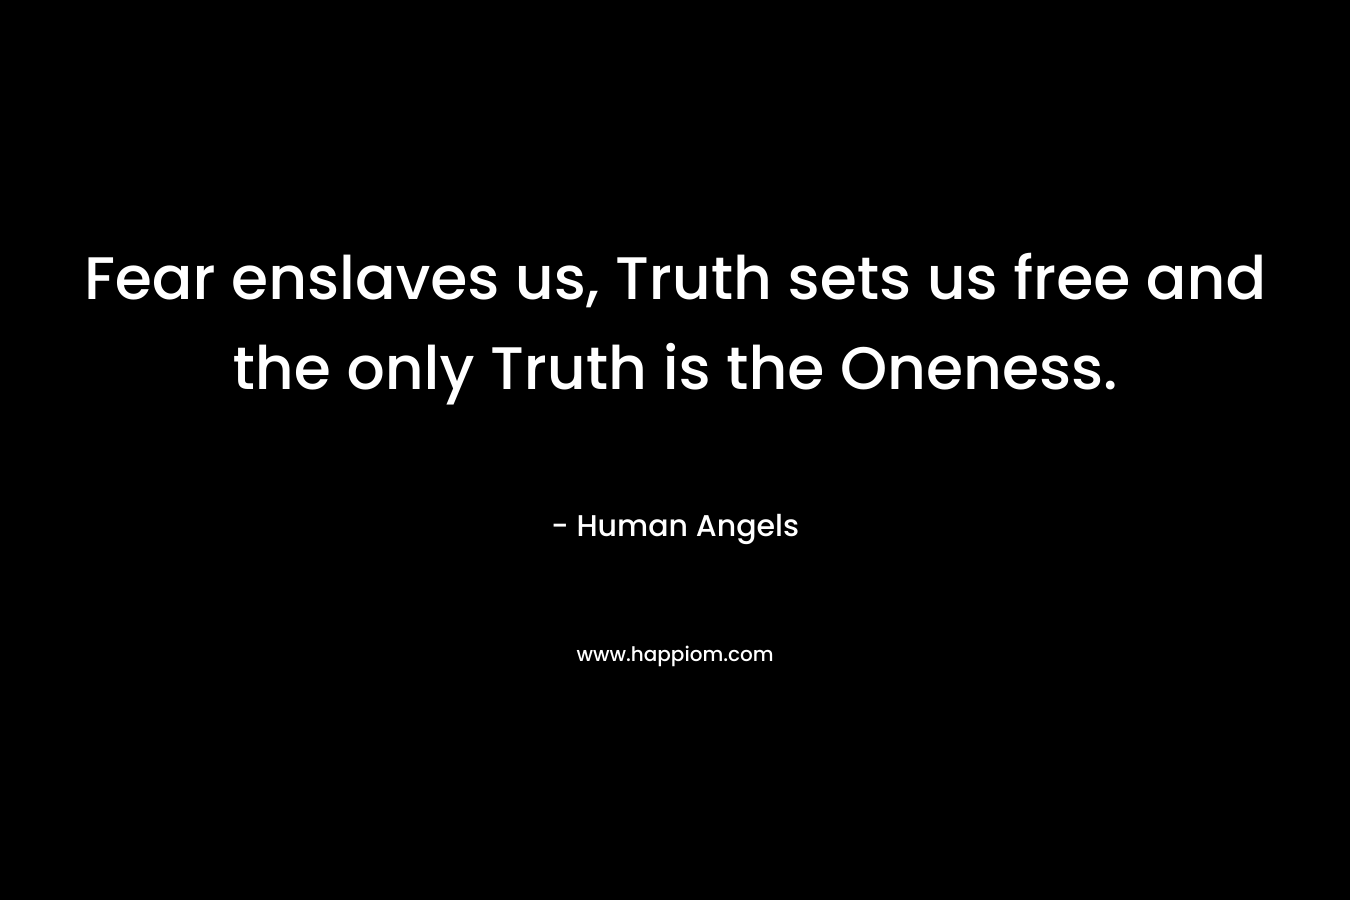 Fear enslaves us, Truth sets us free and the only Truth is the Oneness. – Human Angels